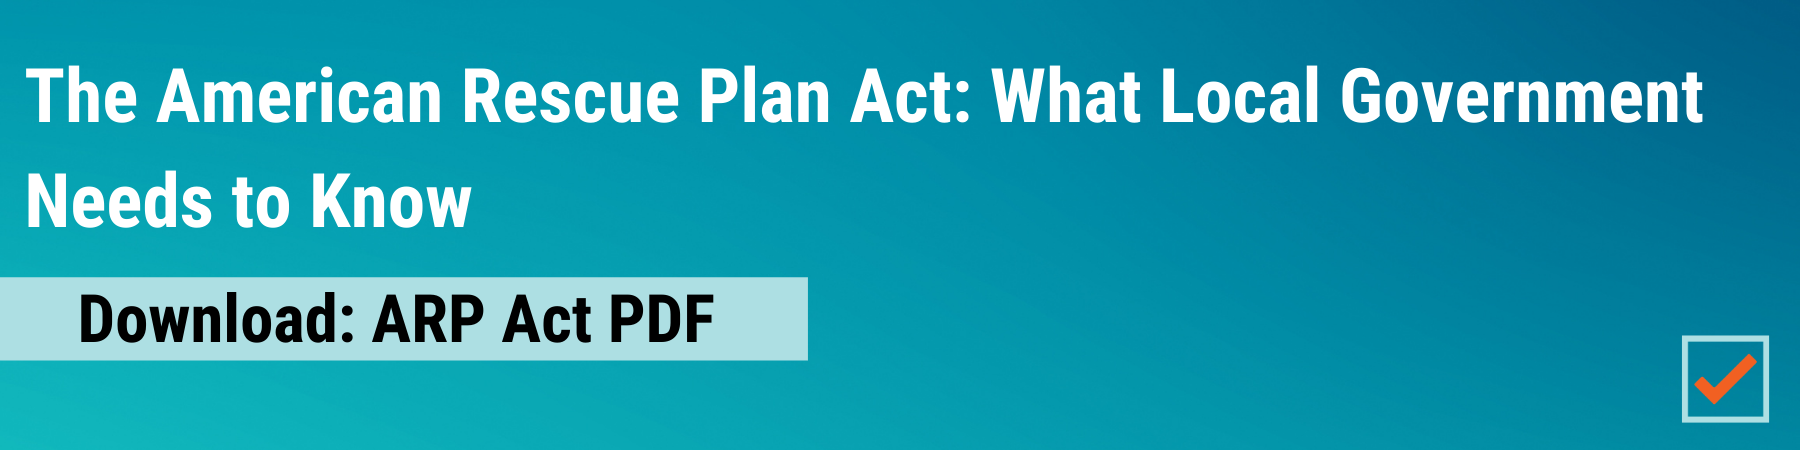 Download the ARP Act PDF: What local government needs to know about the ARP Act.